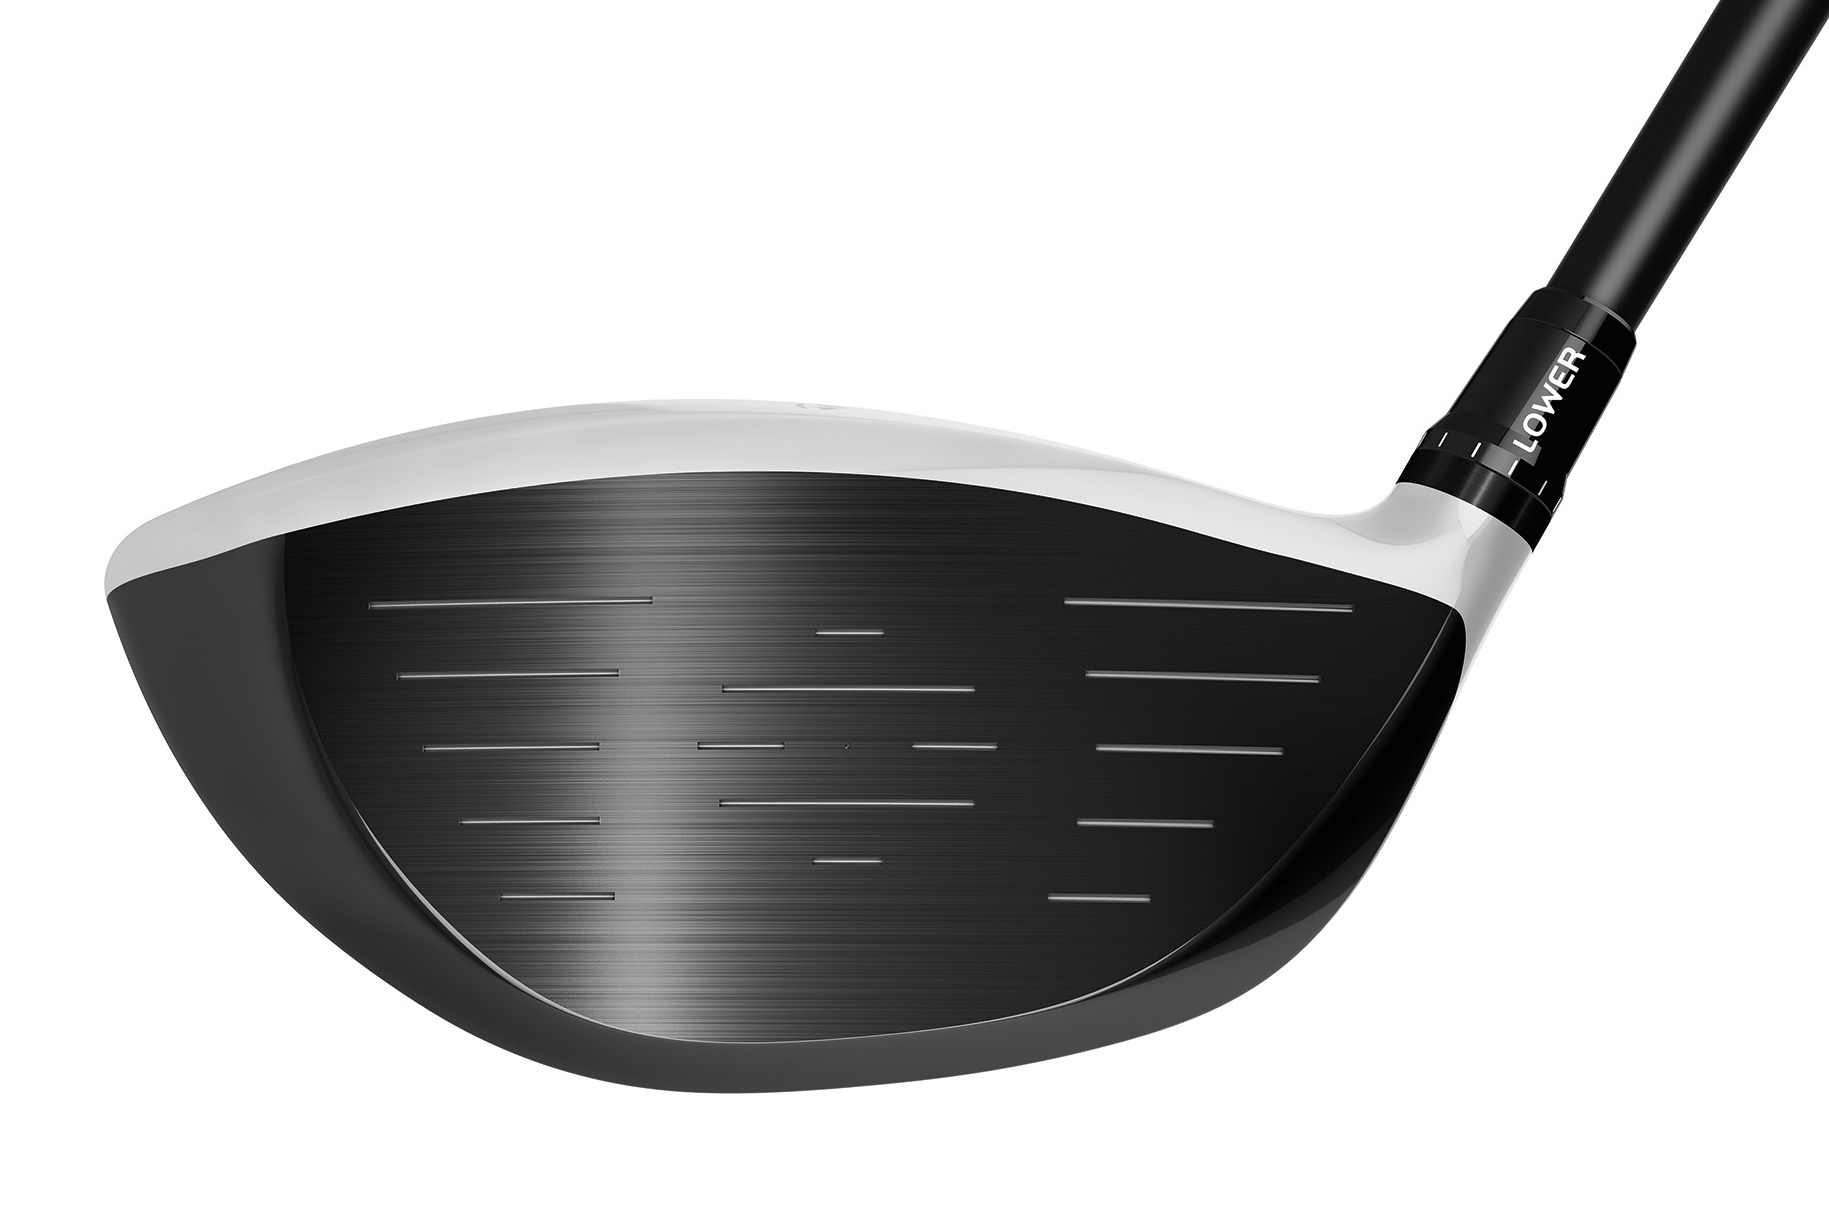 TaylorMade launches new M1 metalwoods for 2017